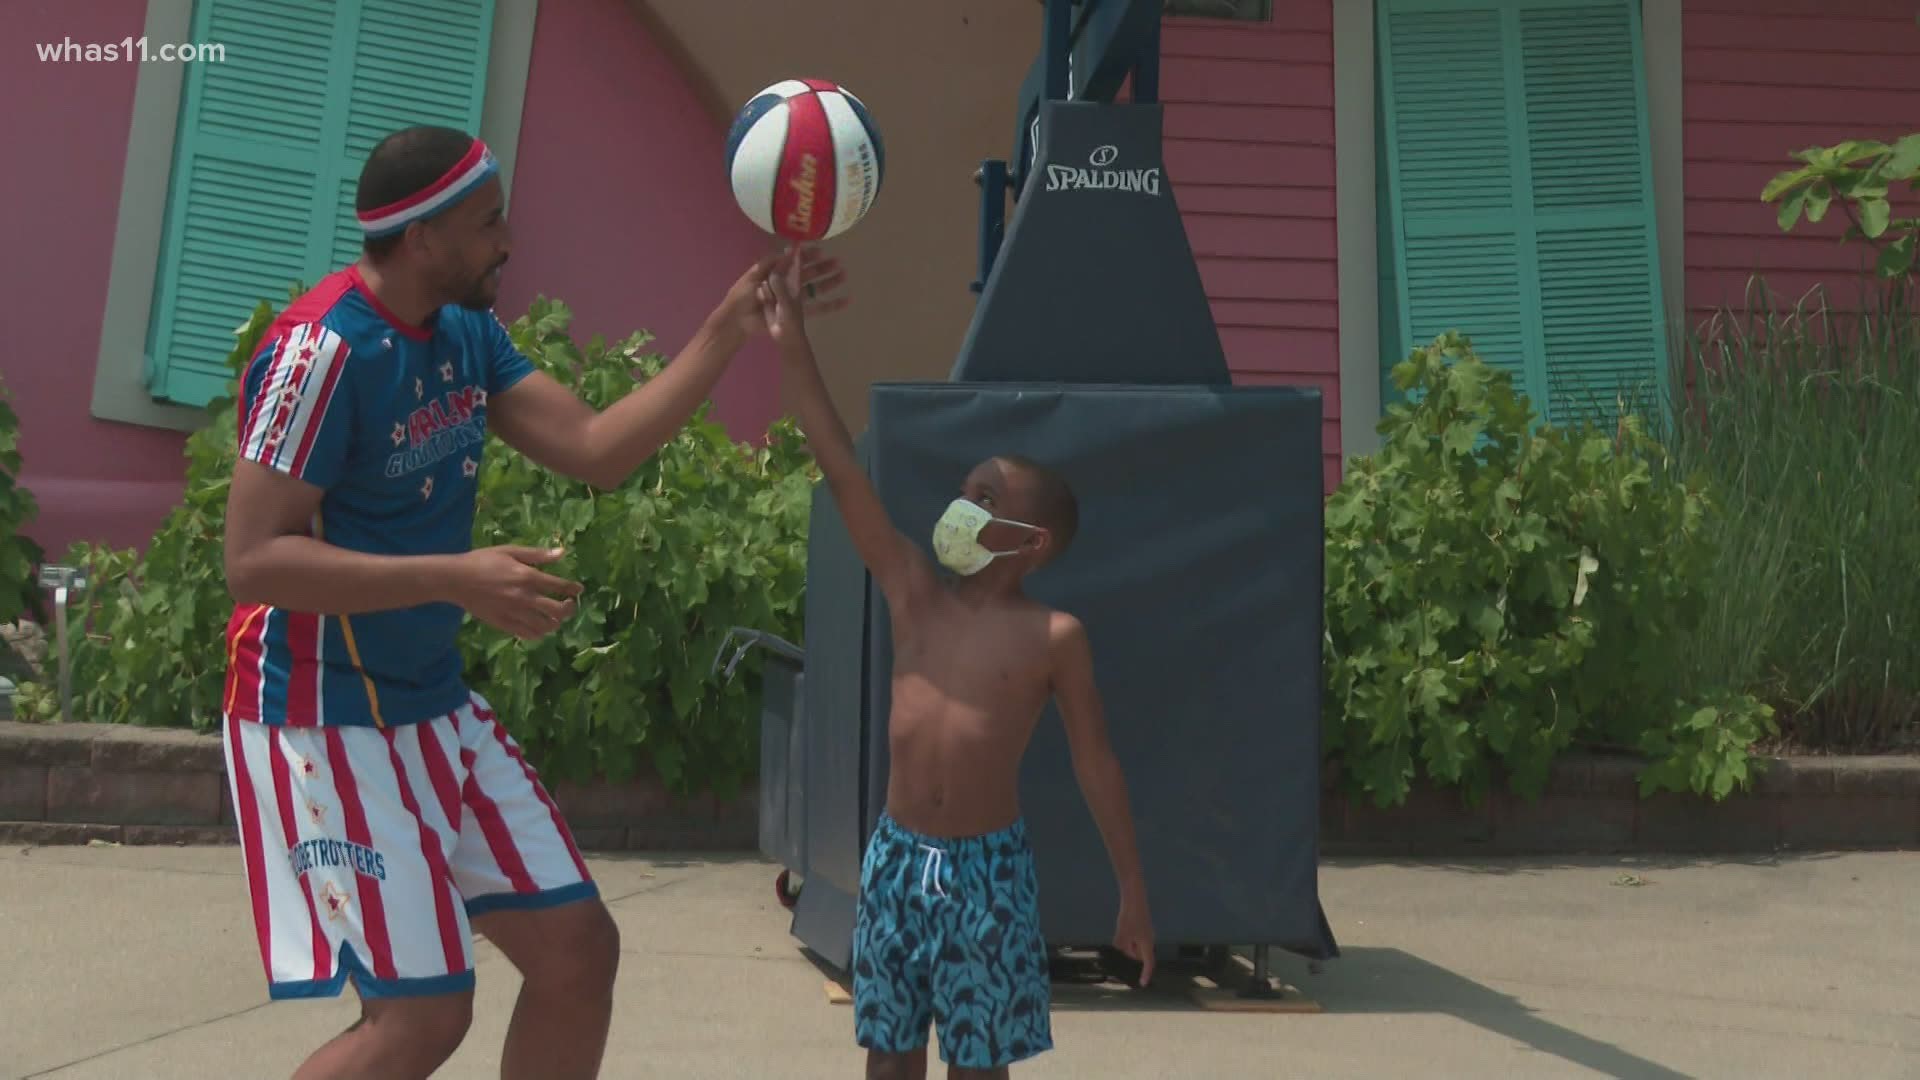 Harlem Globetrotters will perform at Kentucky Kingdom for a full week starting Saturday, June 19. The show is free with admission to the park.